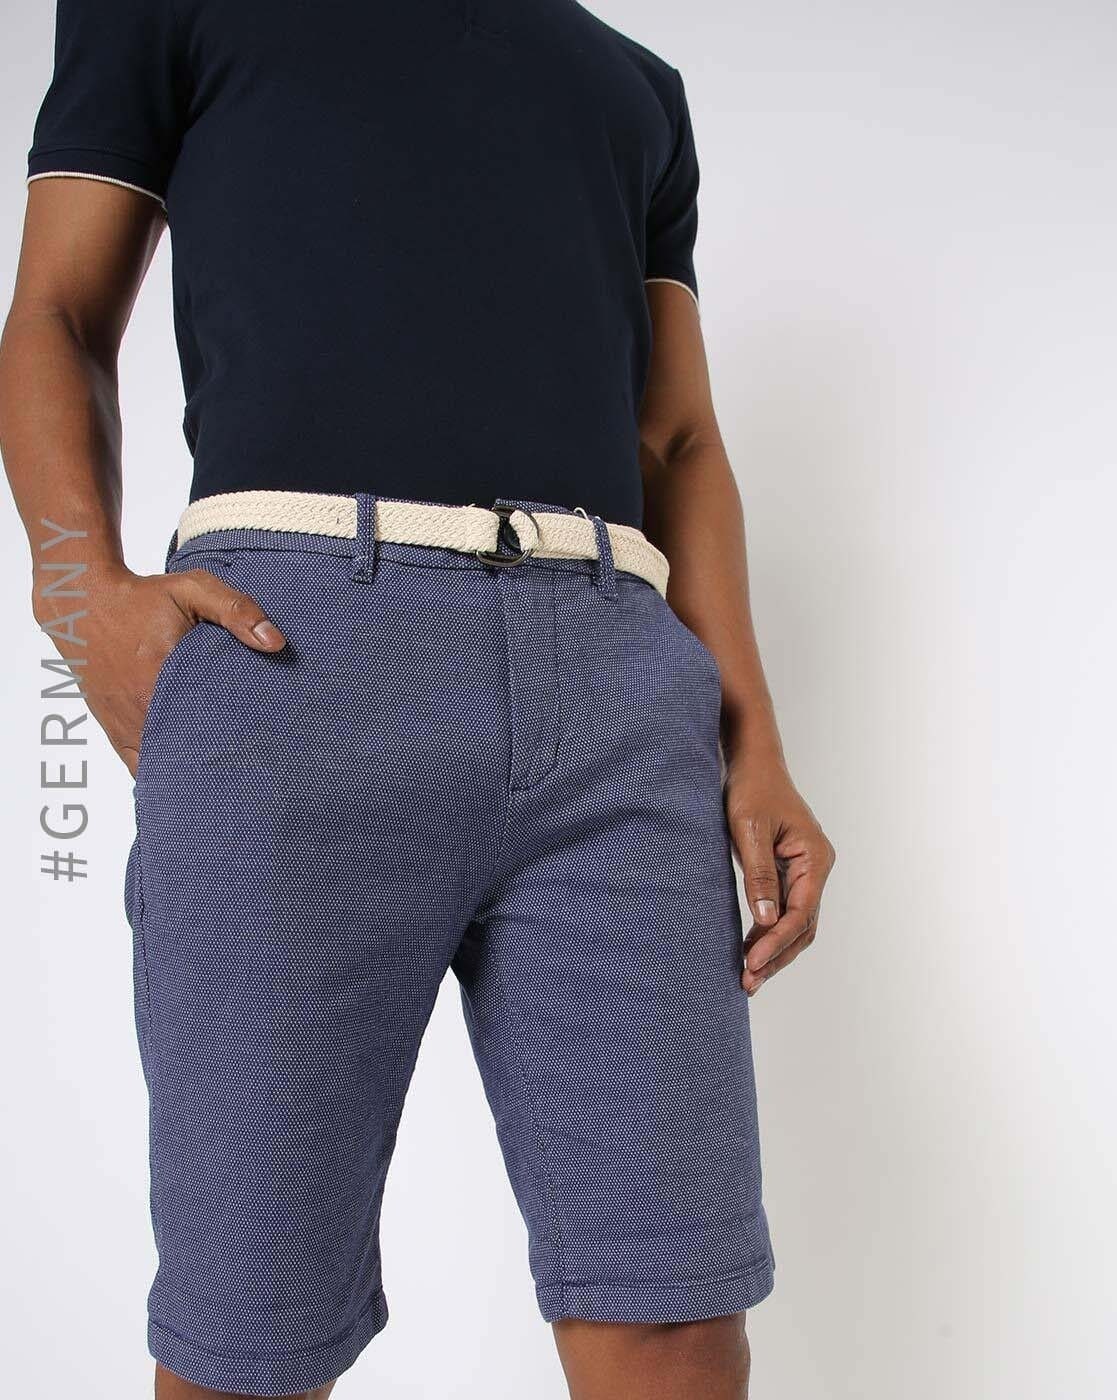 by Shorts Blue & 3/4ths Men Buy Tailor Online Tom for